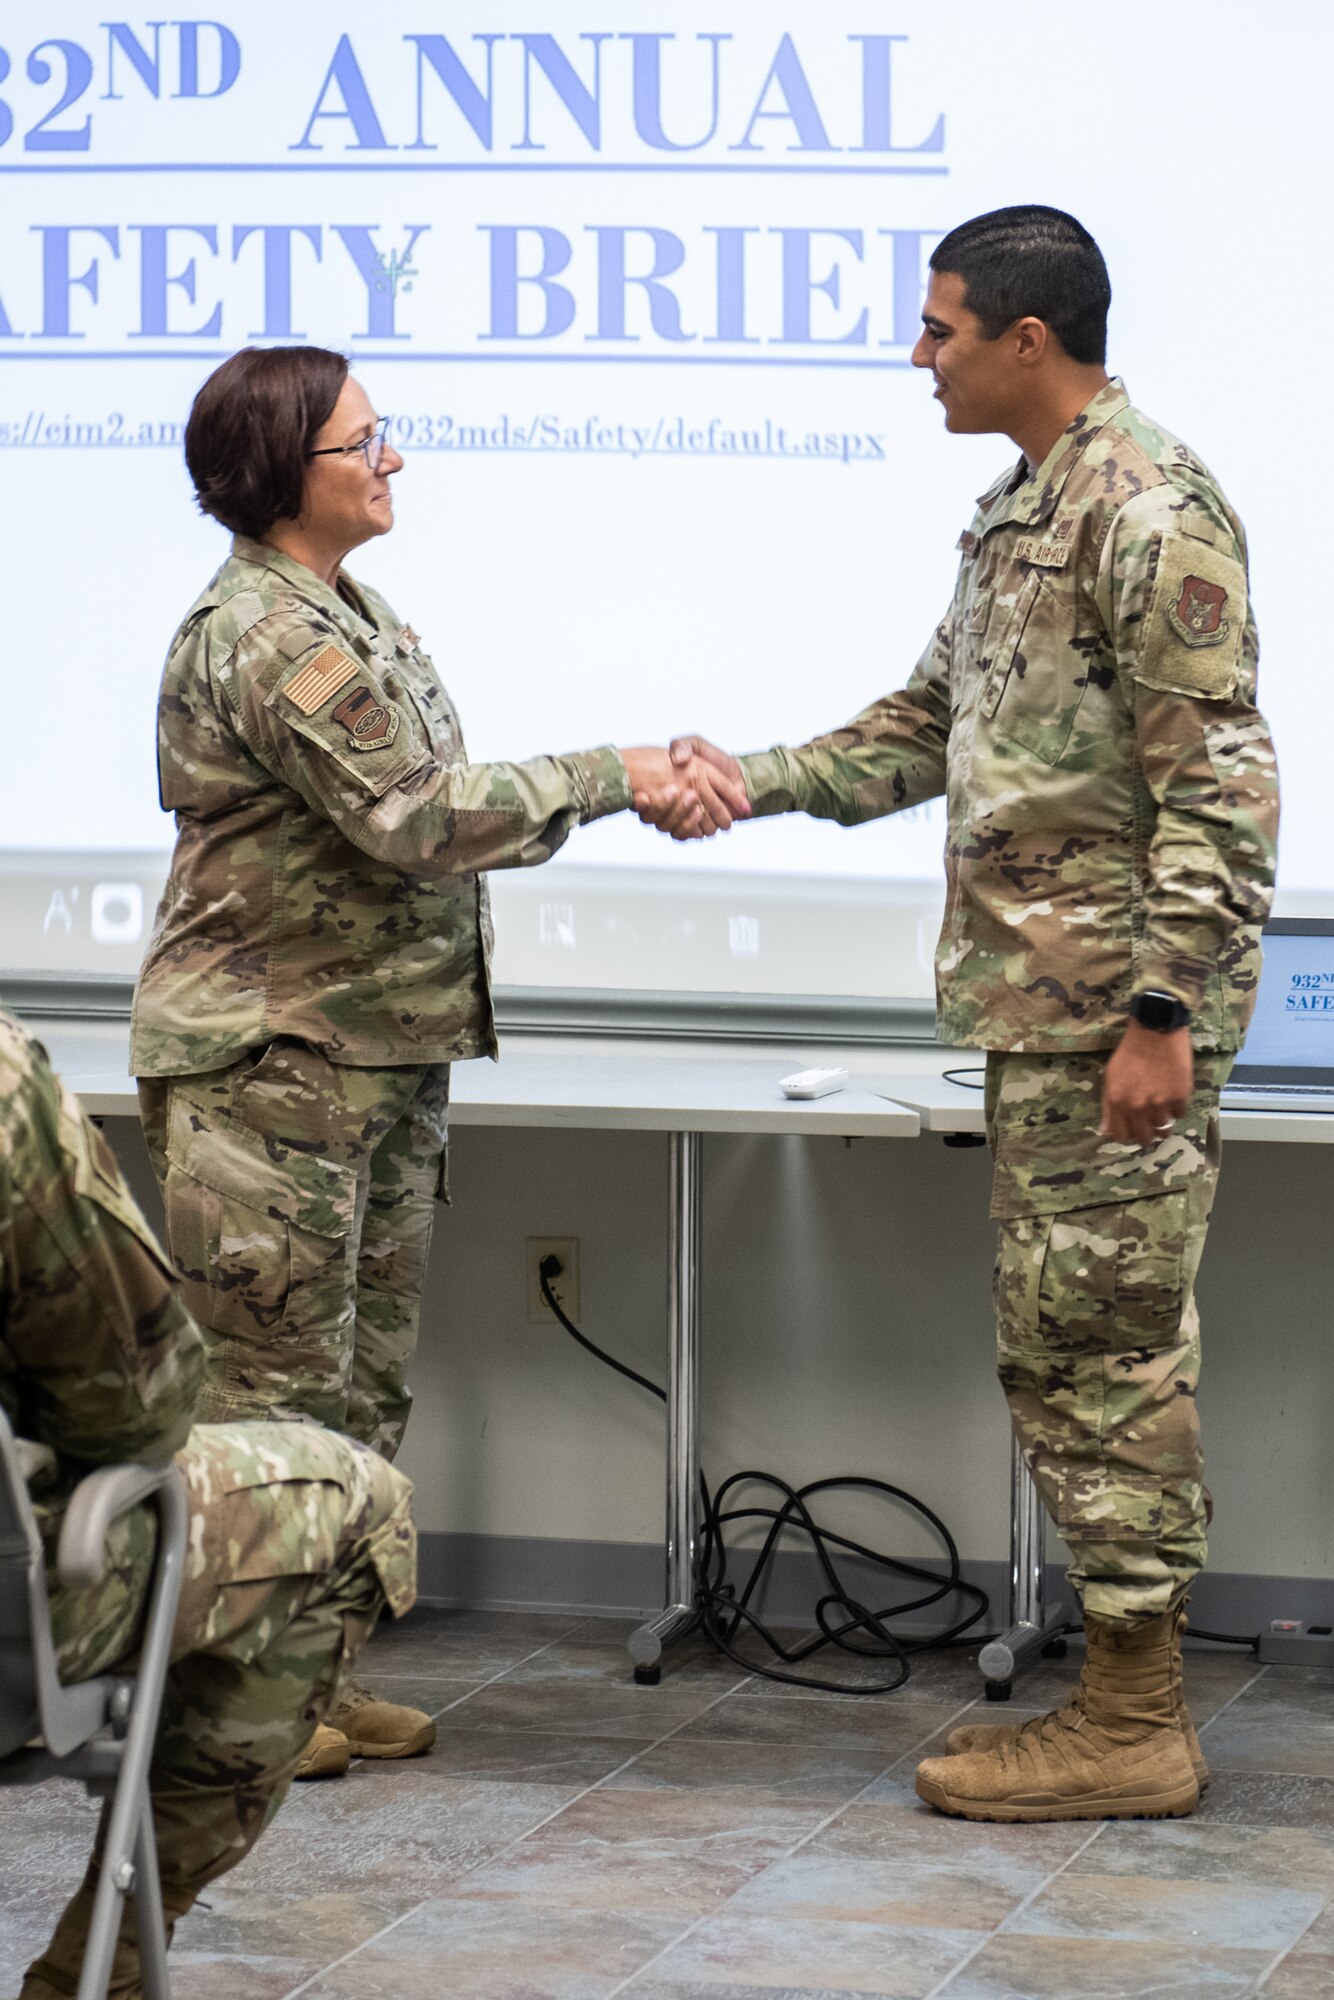 Lt. Col. Julie Novy, 932nd Airlift Wing, Inspector General Office, presents Senior Airman Warren McKeithen, 932nd AW, Medical Group, with an Inspector General coin at Scott Air Force Base, Illinois, July 10, 2021. During an active shooter drill McKeithen efficiently conducted a recall of the unit and realized there was a member who was non responsive. They simulated a death of a member and he was able to relay that one of his members was on base and was not found to the wing. McKeithen reacted to the situation properly unlike many units before him, earning him the IG coin! (U.S. Air Force Photo by Staff Sgt. Brooke Spenner)